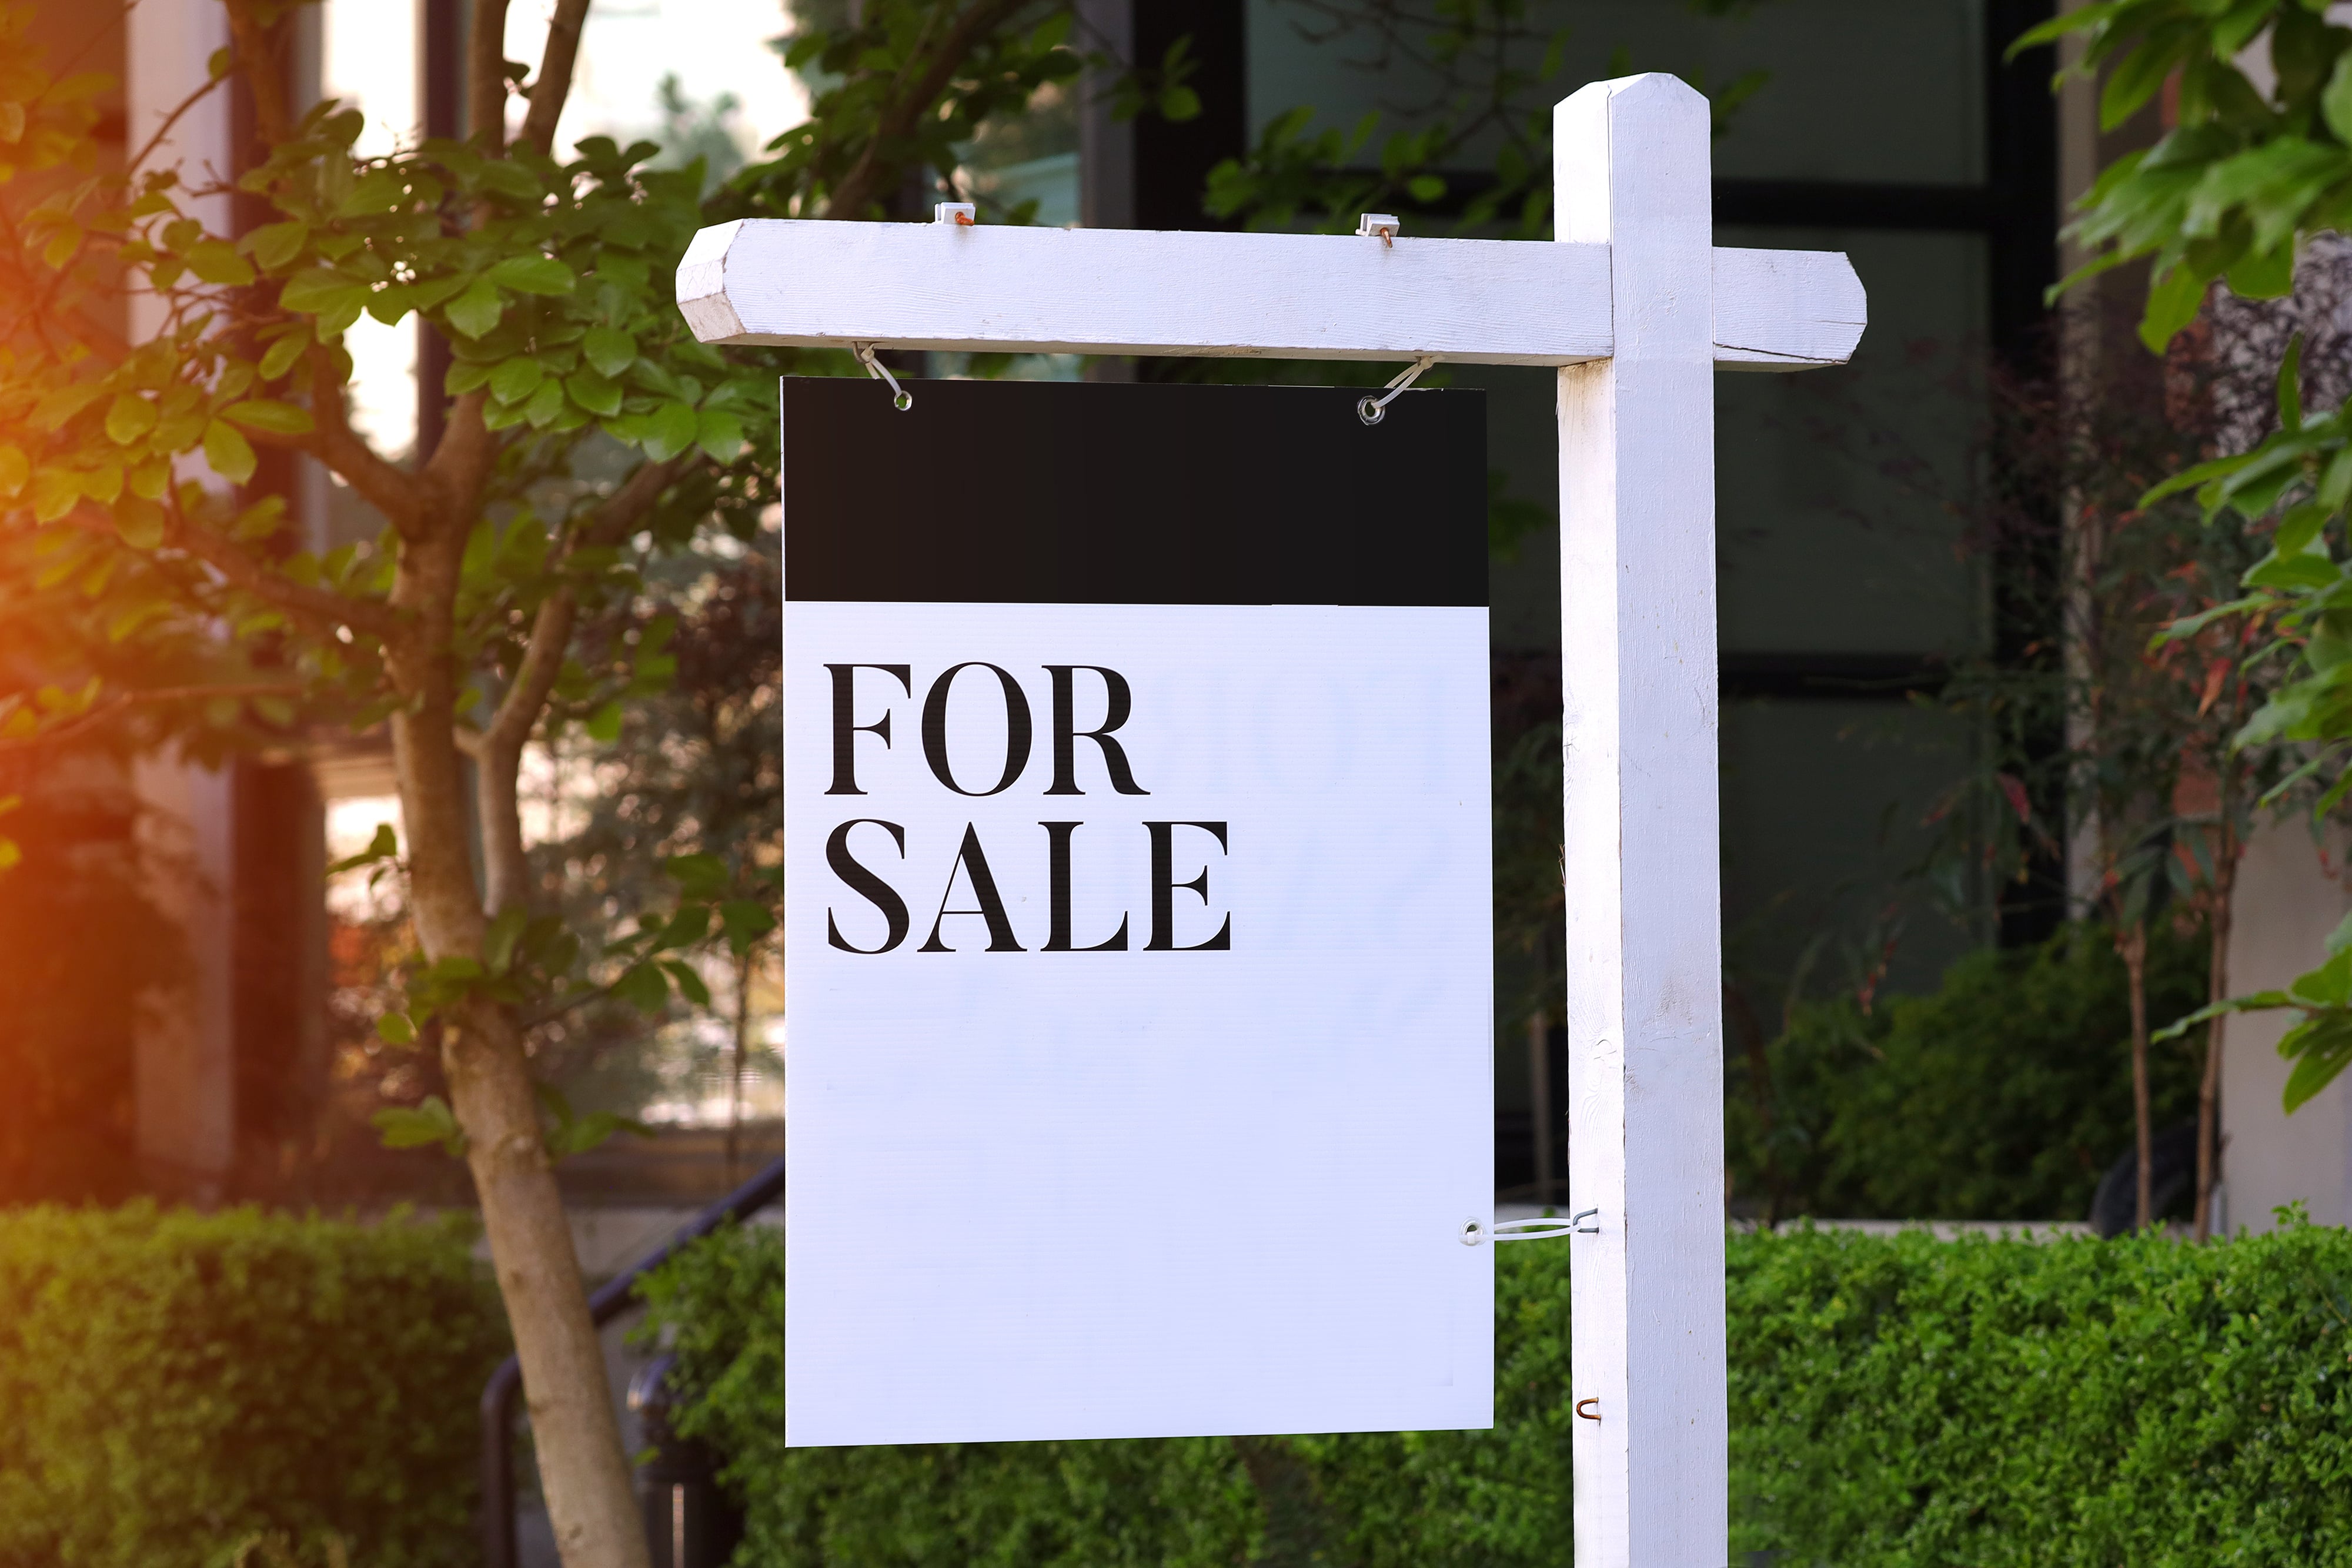 Picture of real estate sale sign